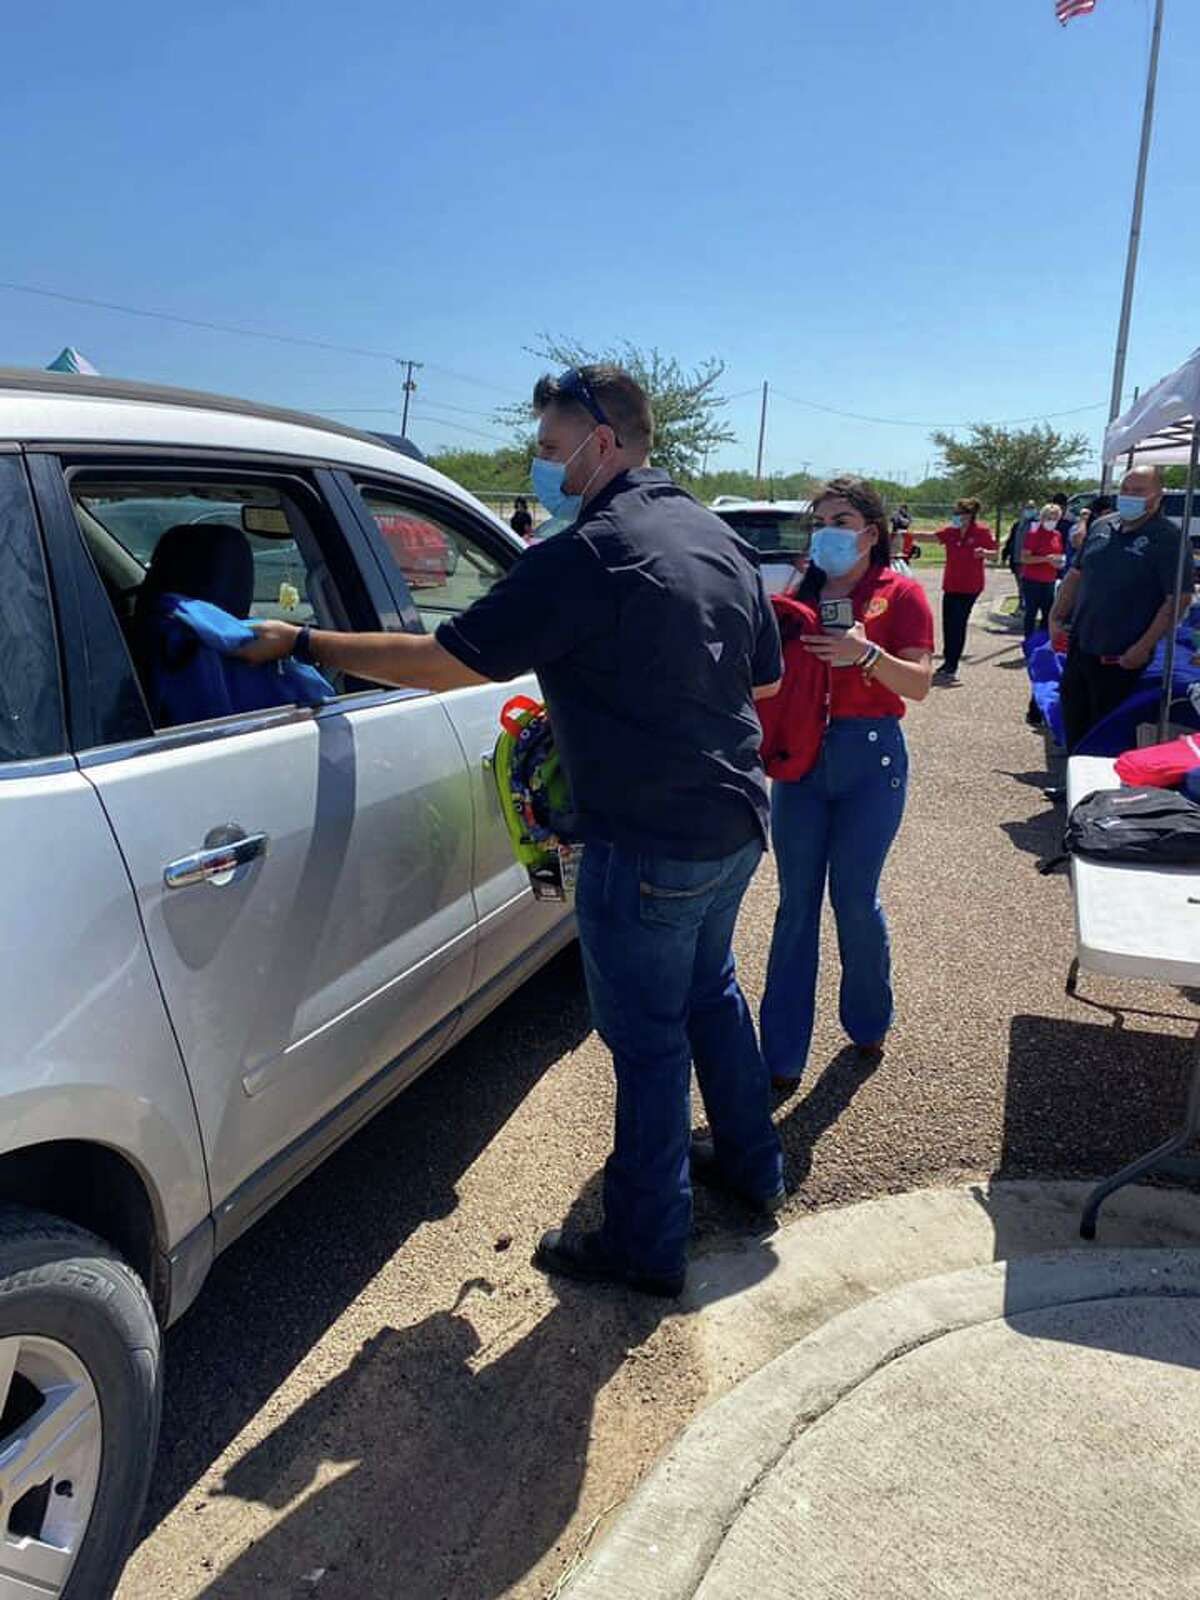 Webb County Commissioner Pct.1 Jesse Gonzalez helped distribute donated school supplies to students in south Laredo for the sixth straight year.